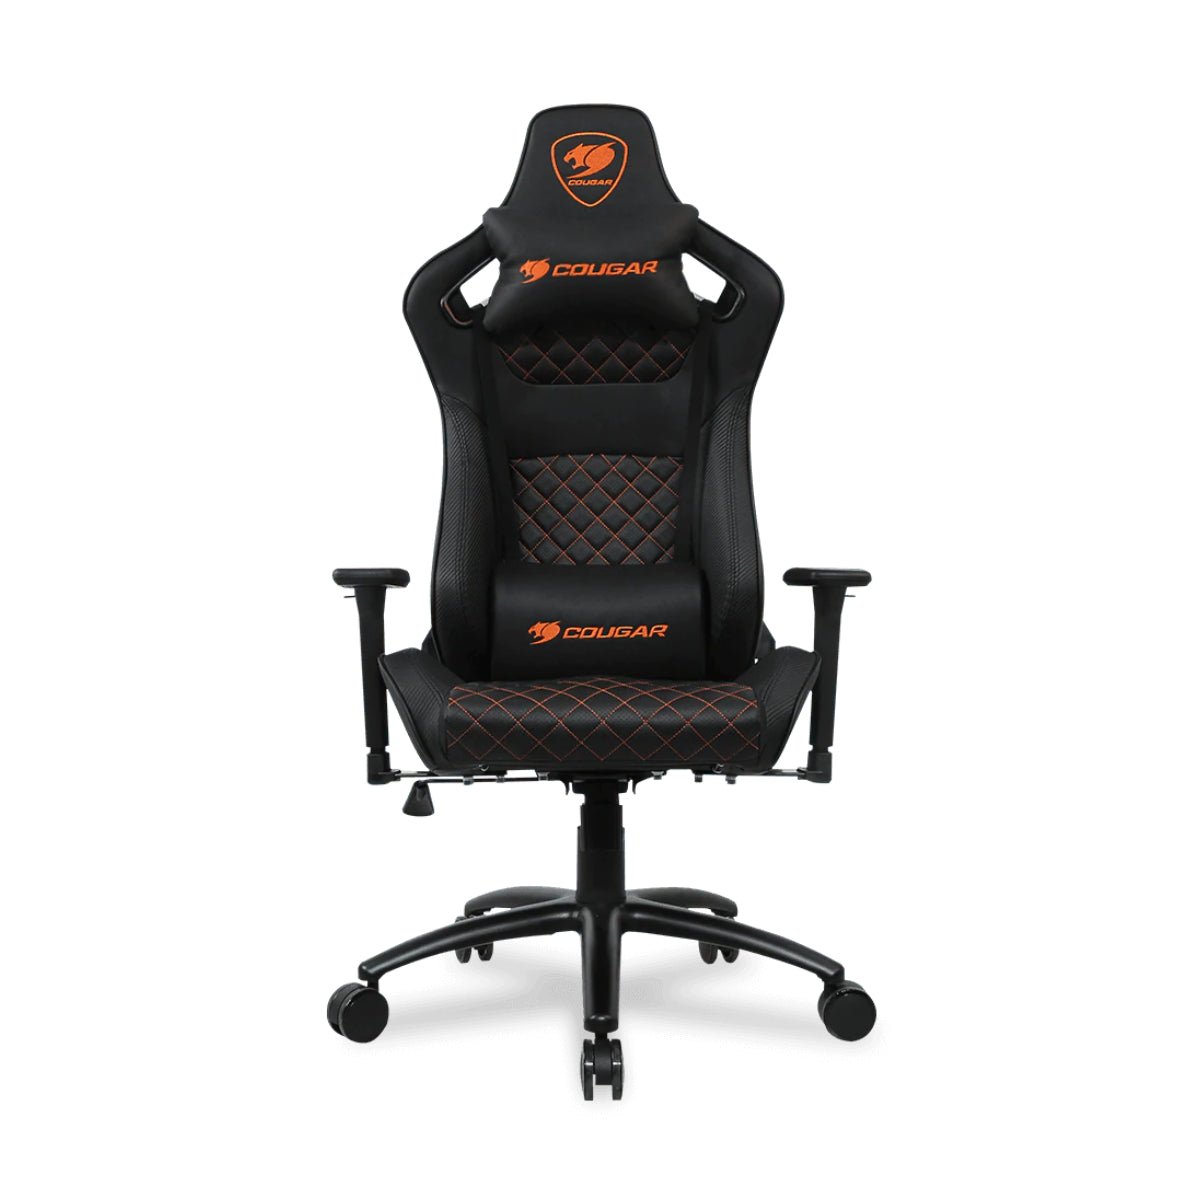 Cougar Explore S Gaming Chair - Black - Store 974 | ستور ٩٧٤